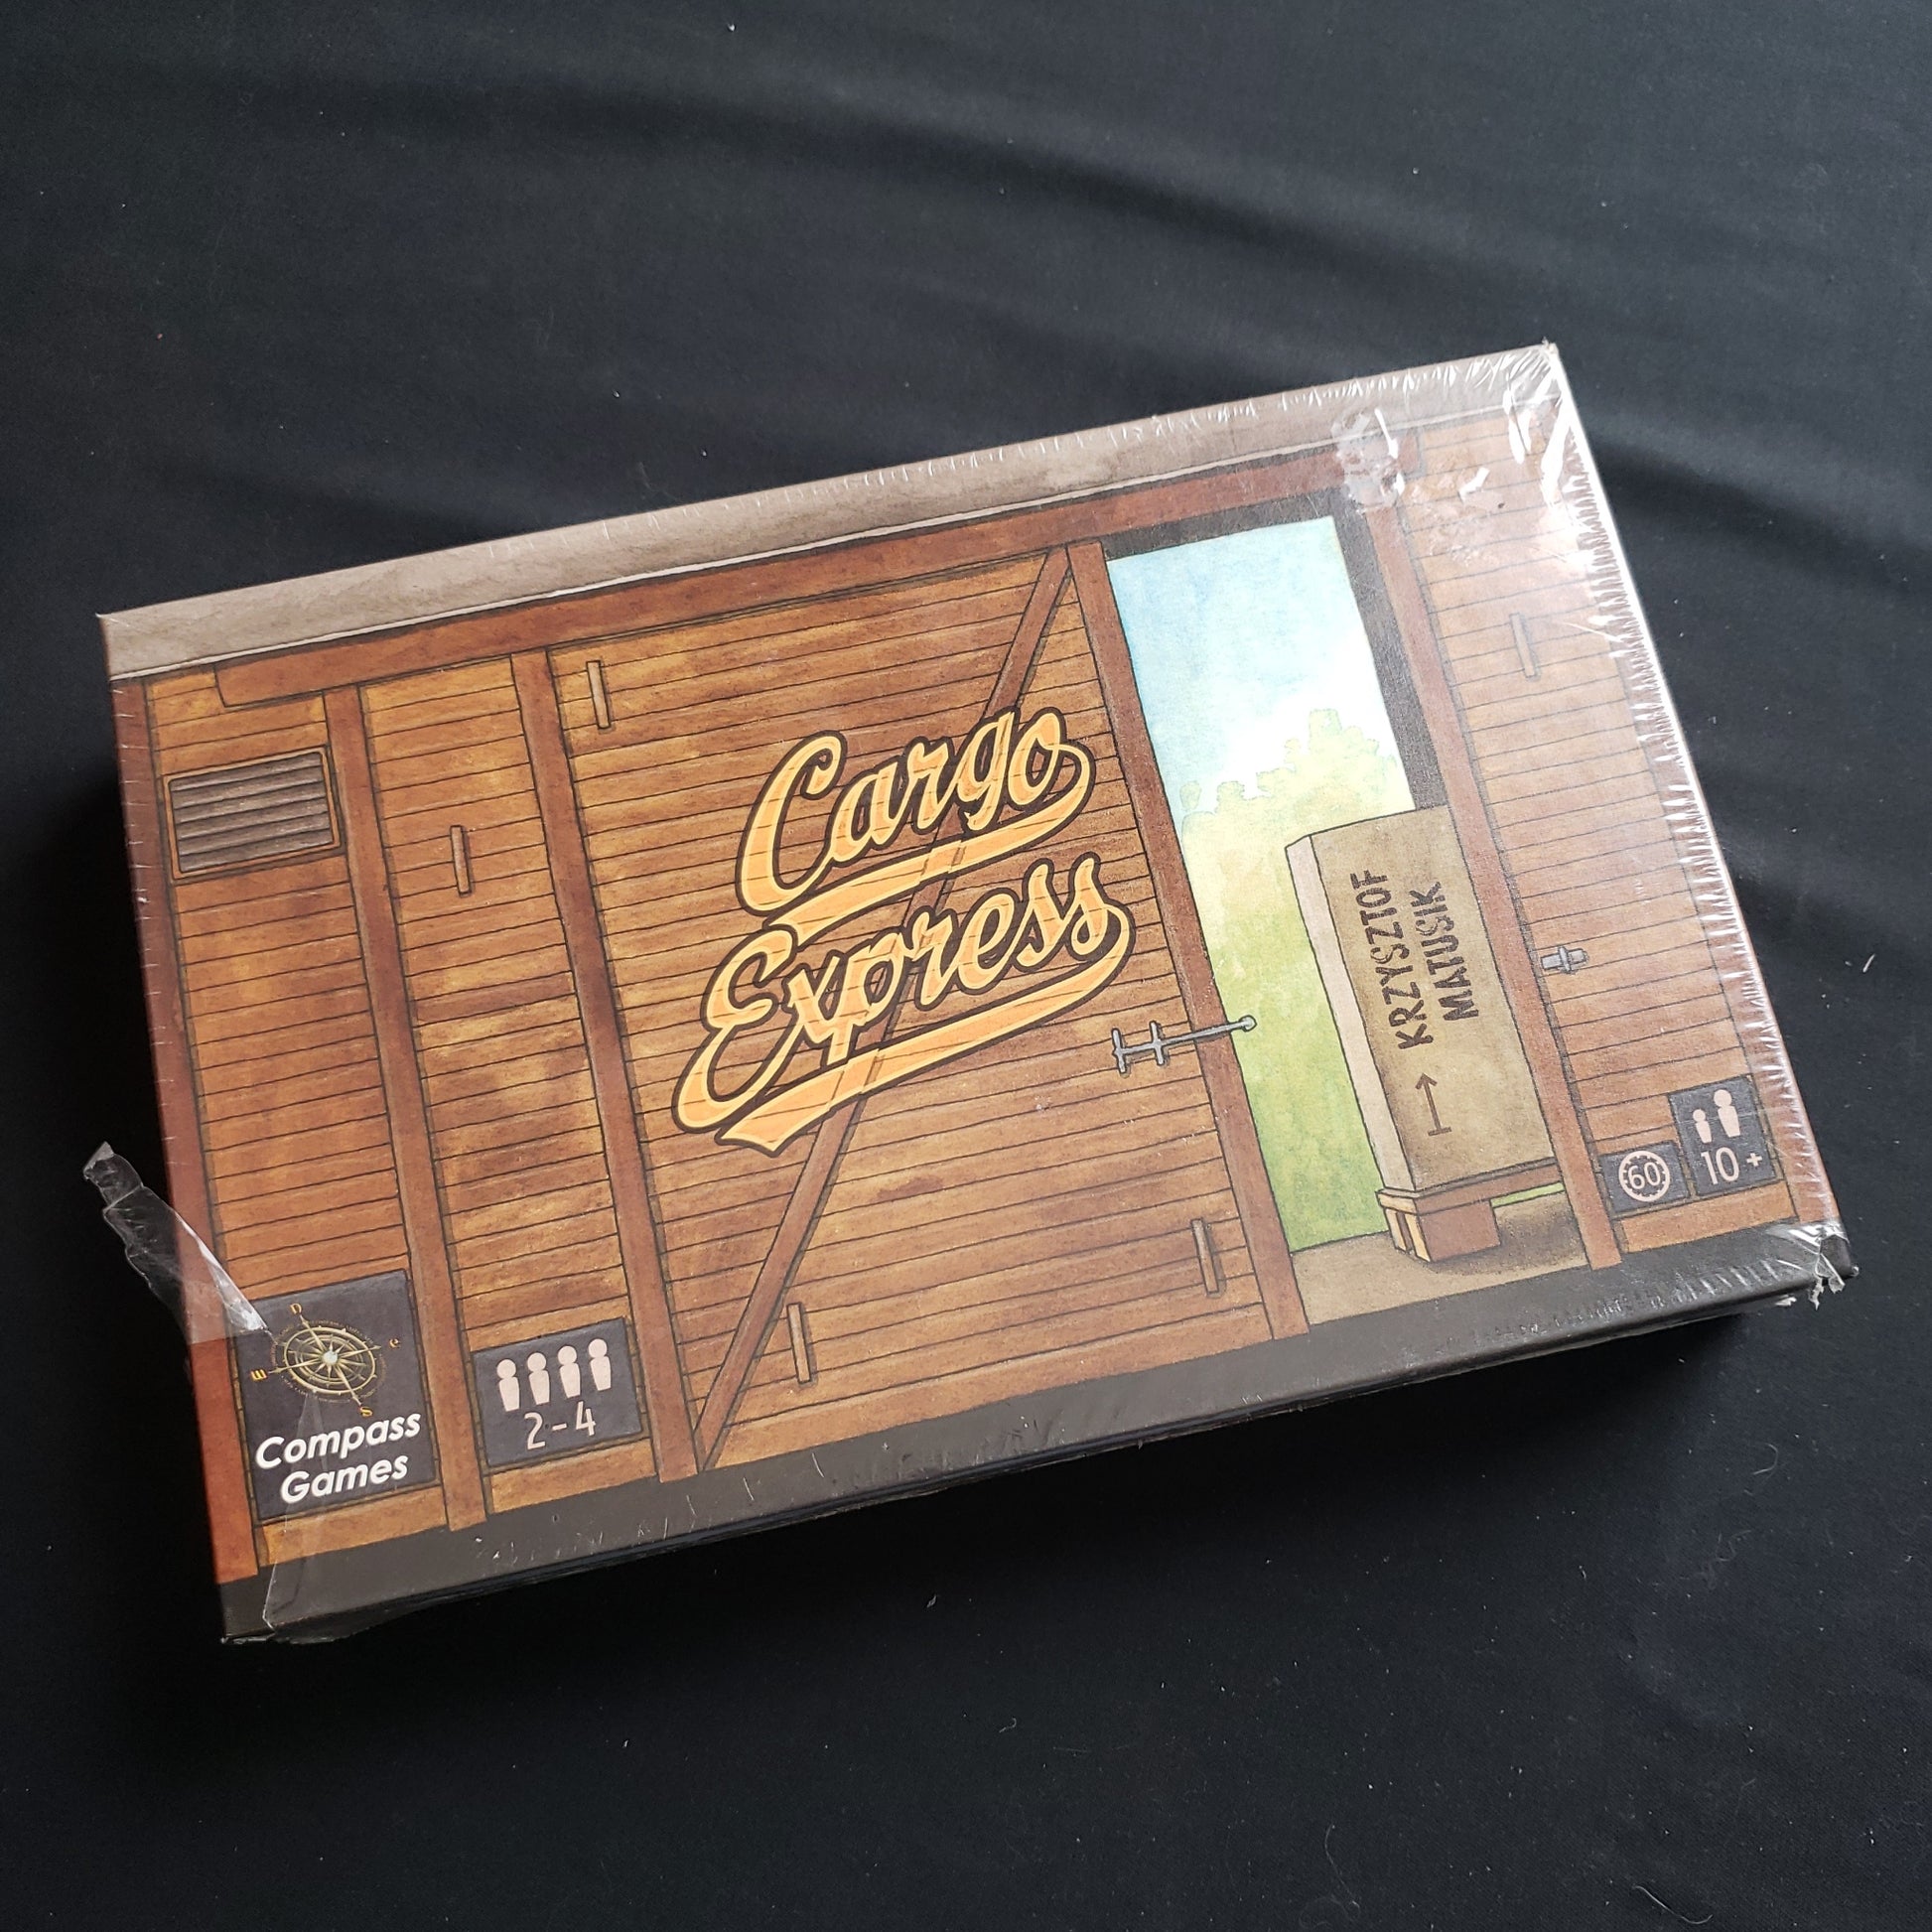 Image shows the front cover of the box of the Cargo Express board game